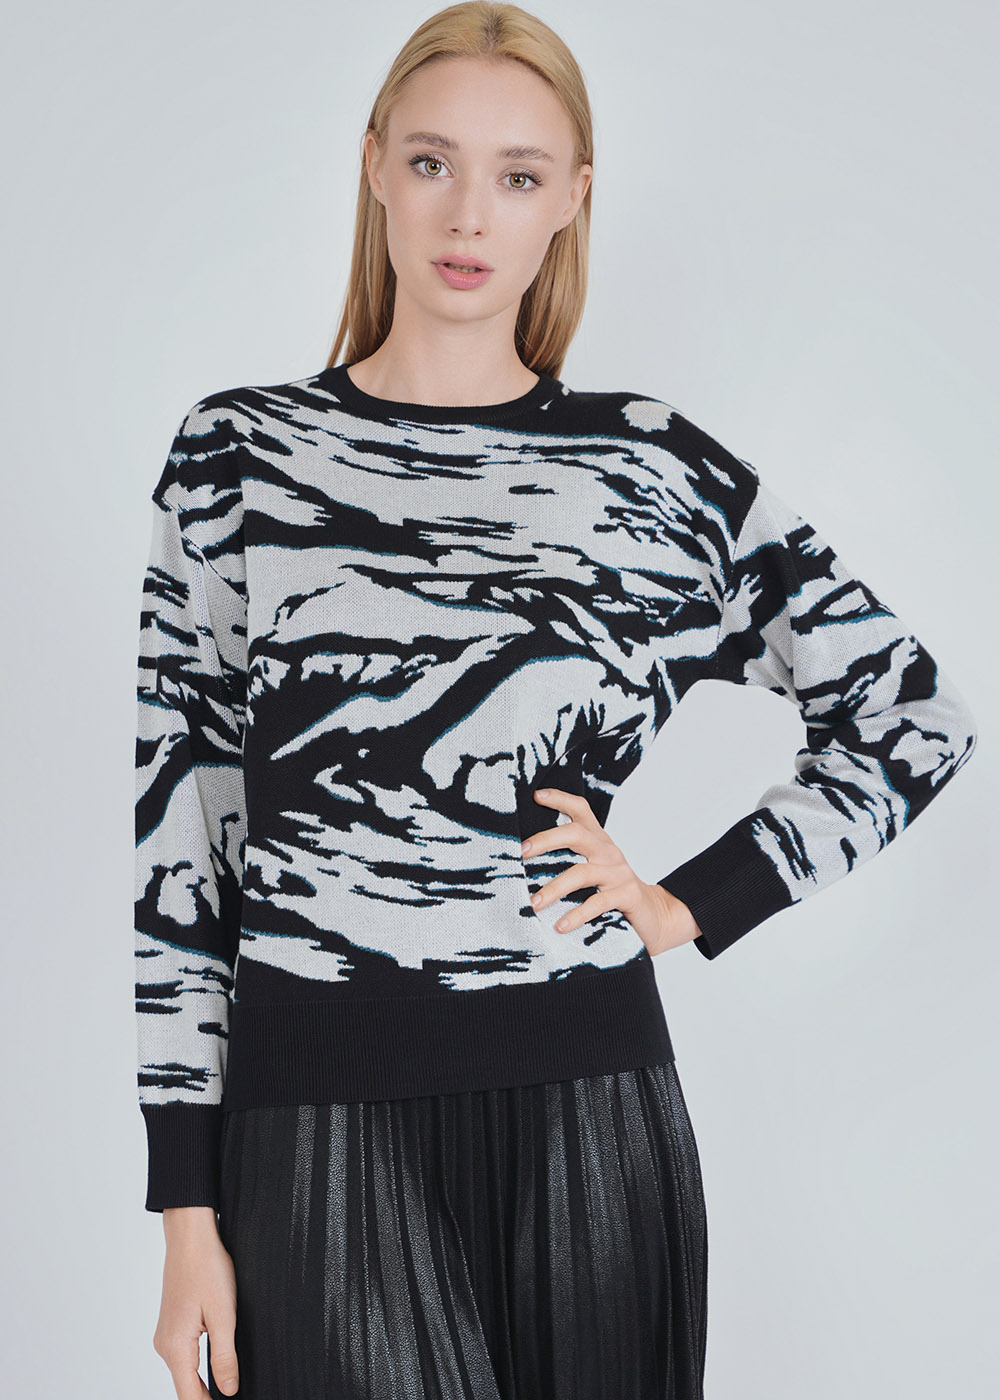 B/W Knit Top with Distinctive Abstract Touch